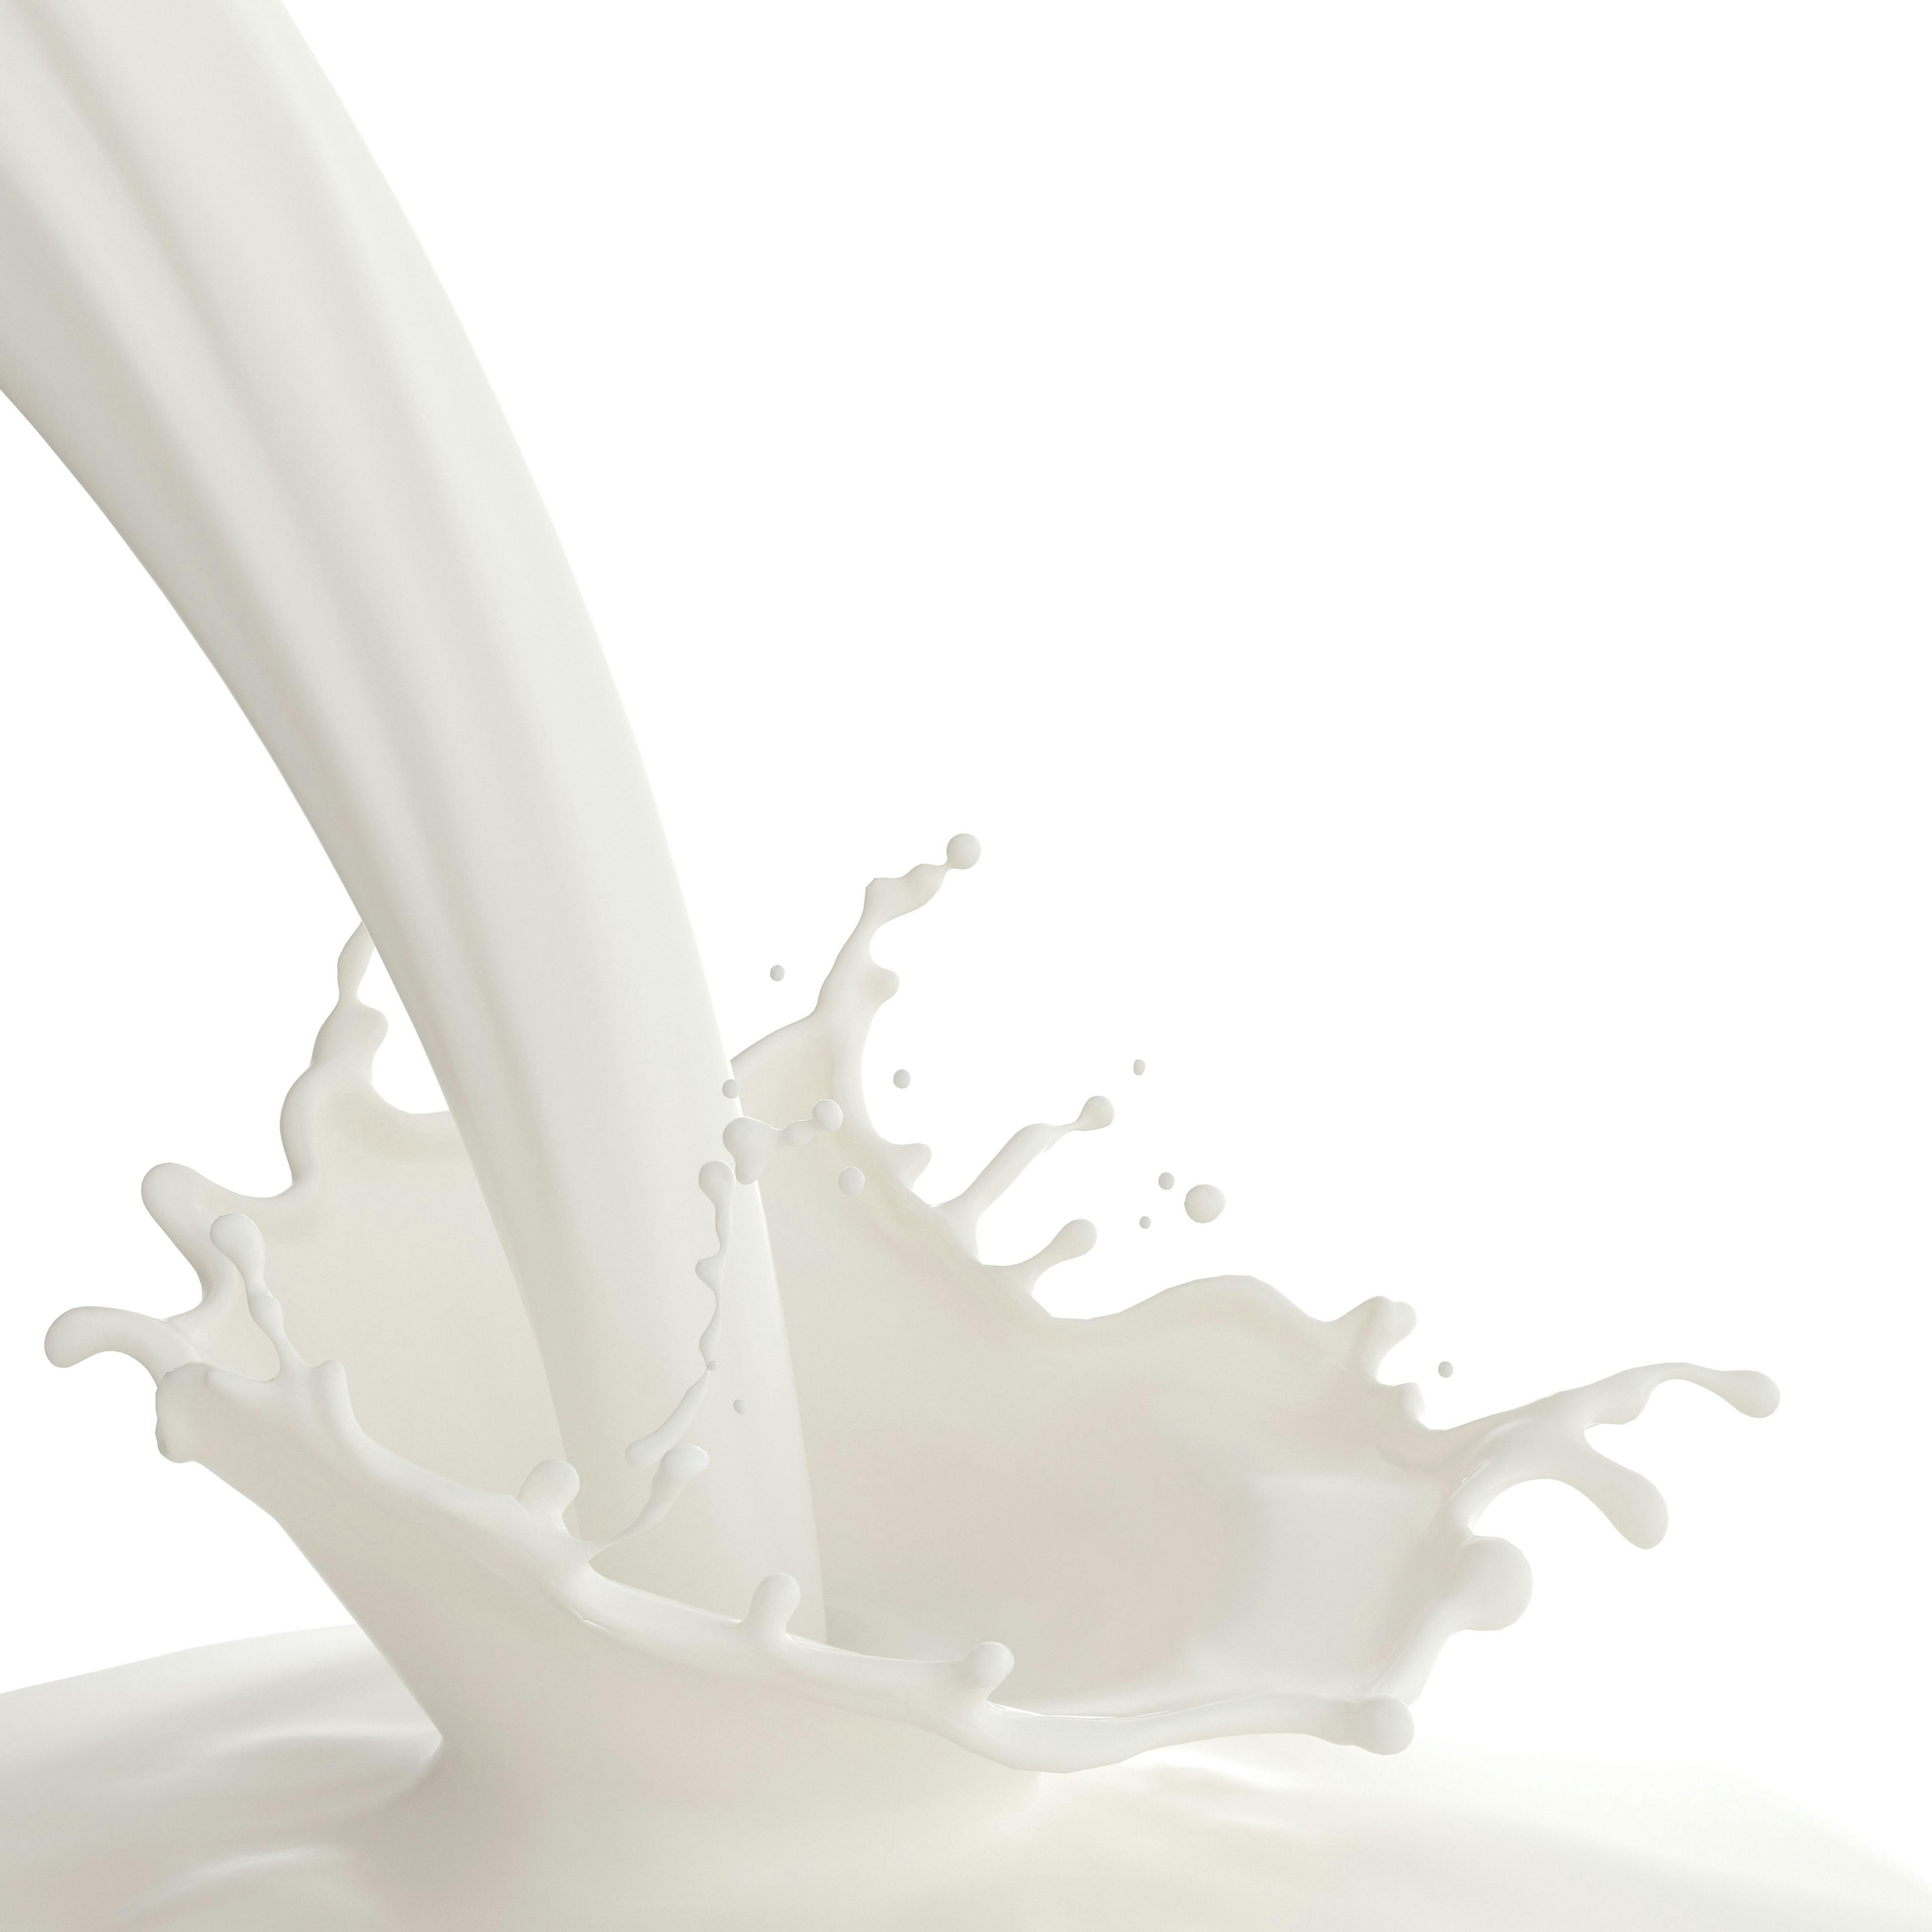 Dairy proteins still tell a good-news story